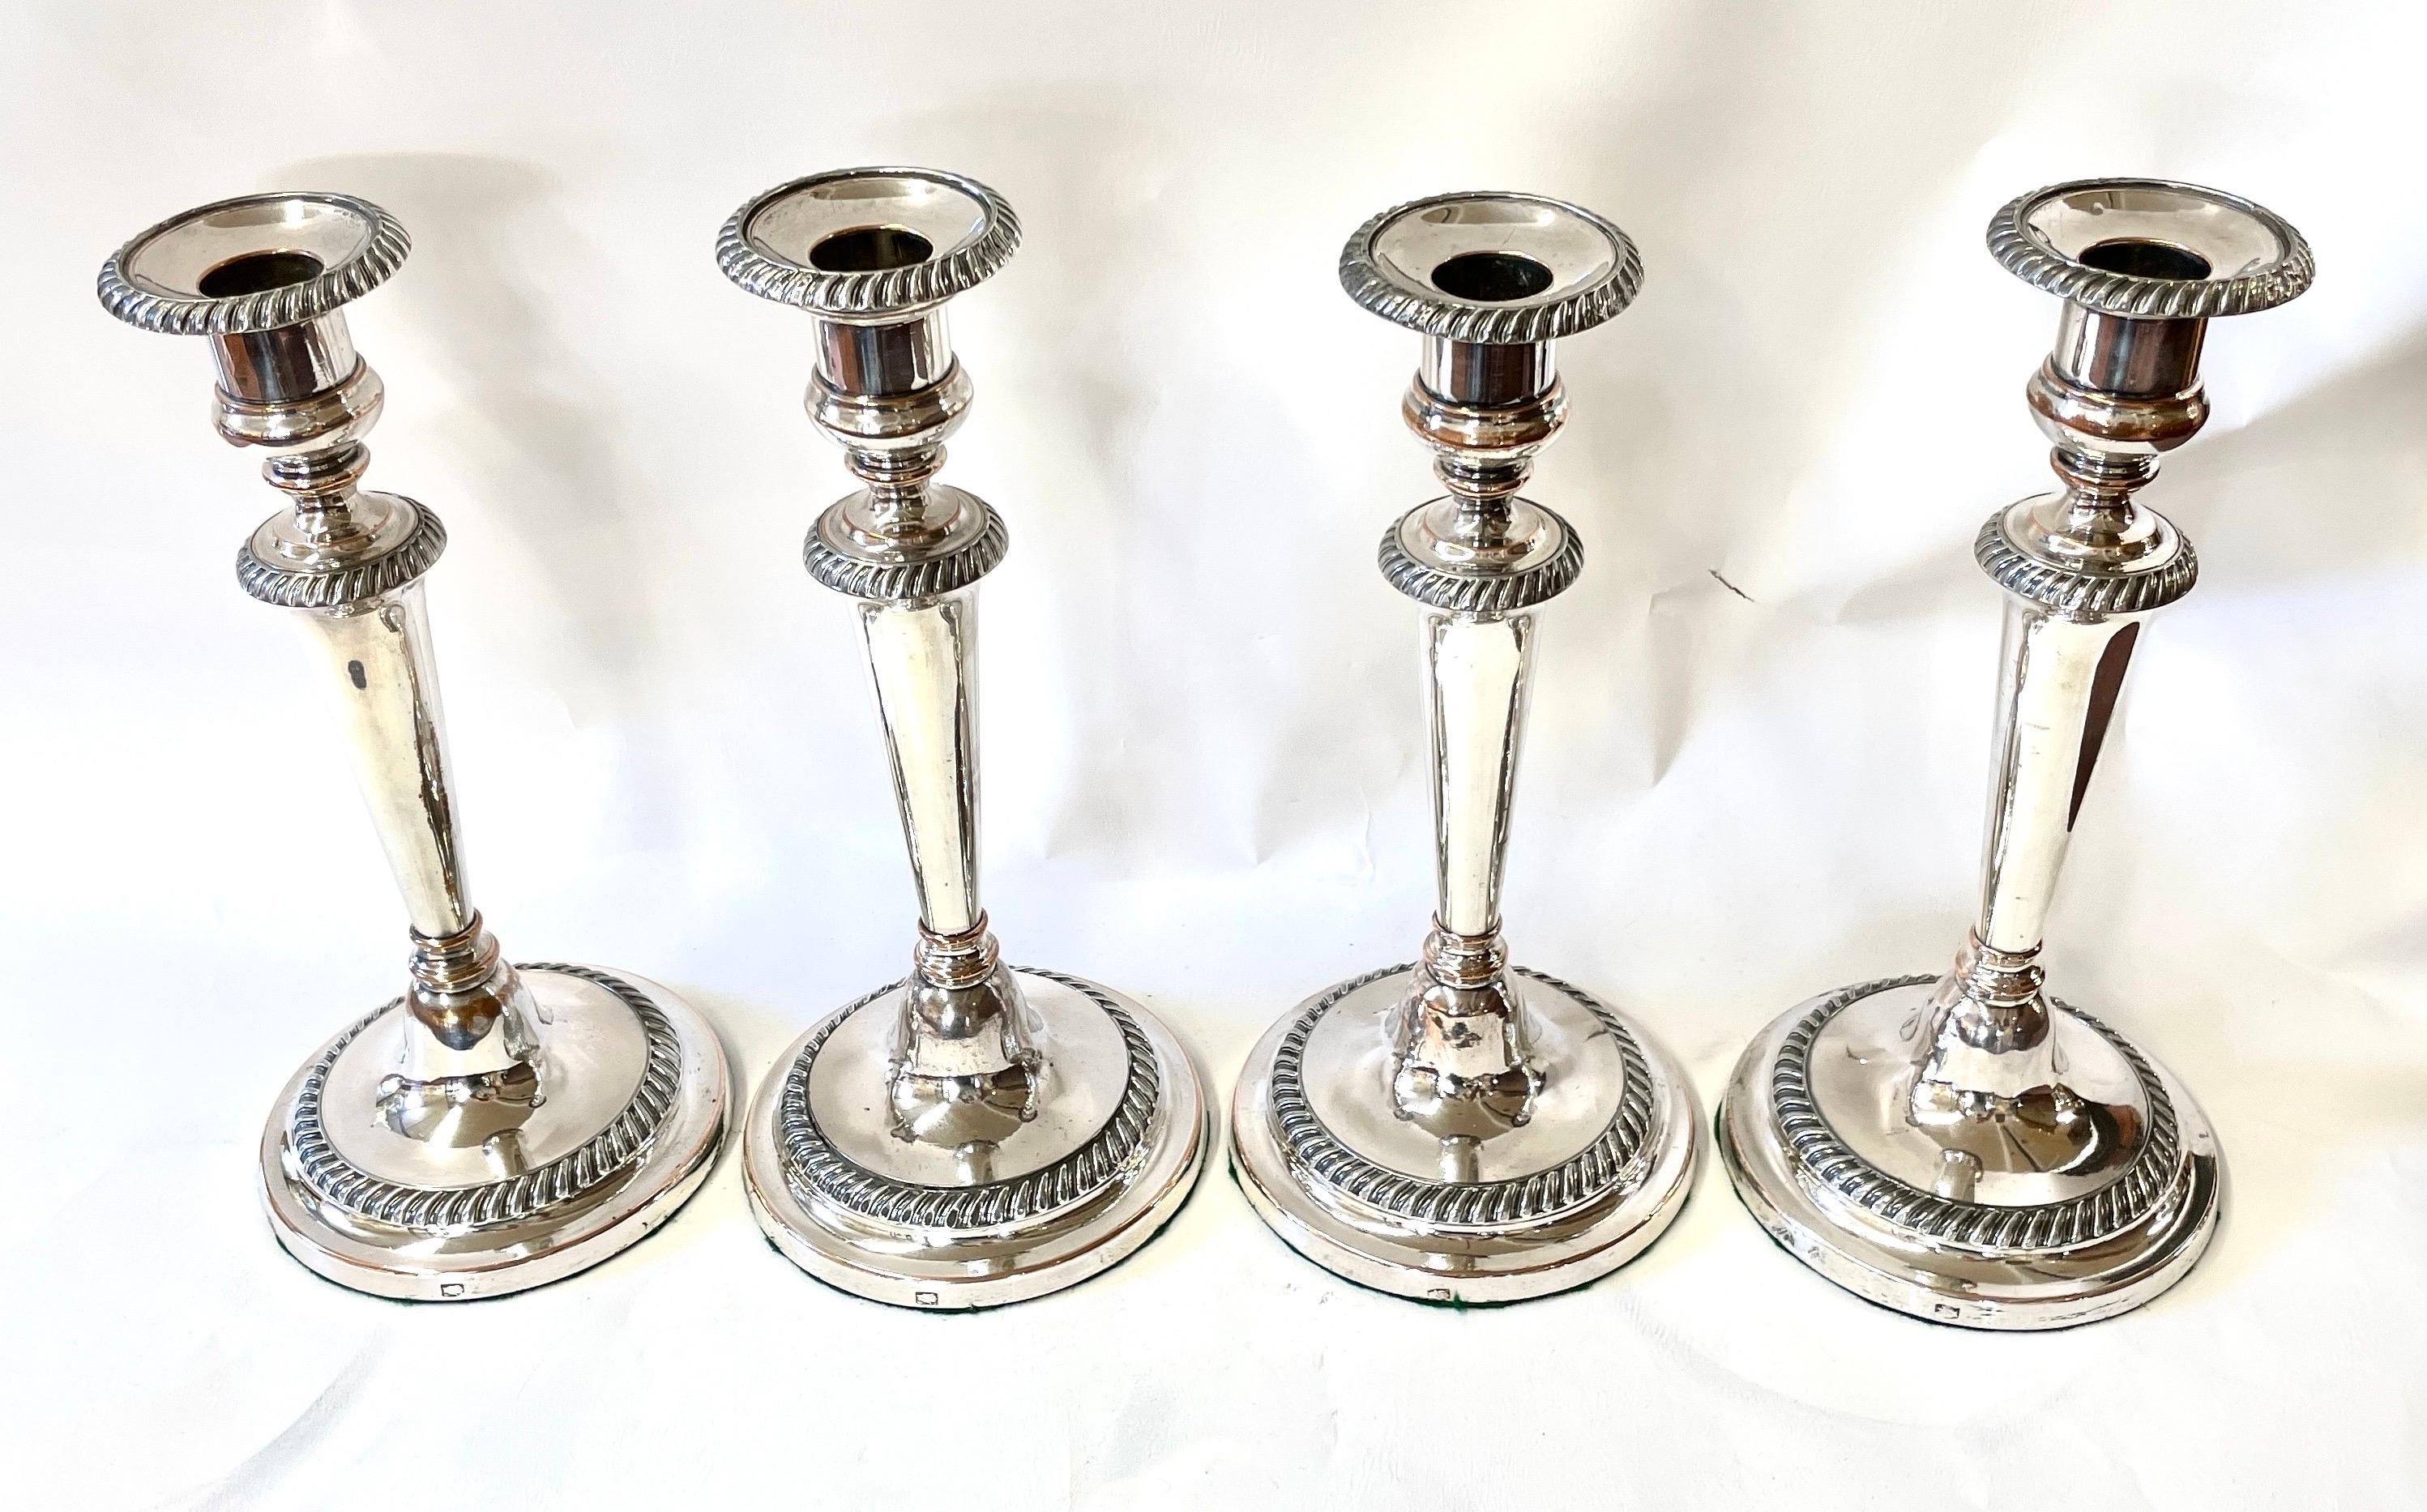 Very Rare Suite of four matching Antique English Geo. III Sheffield Plate round base gadroon border Candlesticks. The gadroon border is reminiscent of those made by one of Sheffield's most illustrious and collected silversmiths, Matthew Boulton.